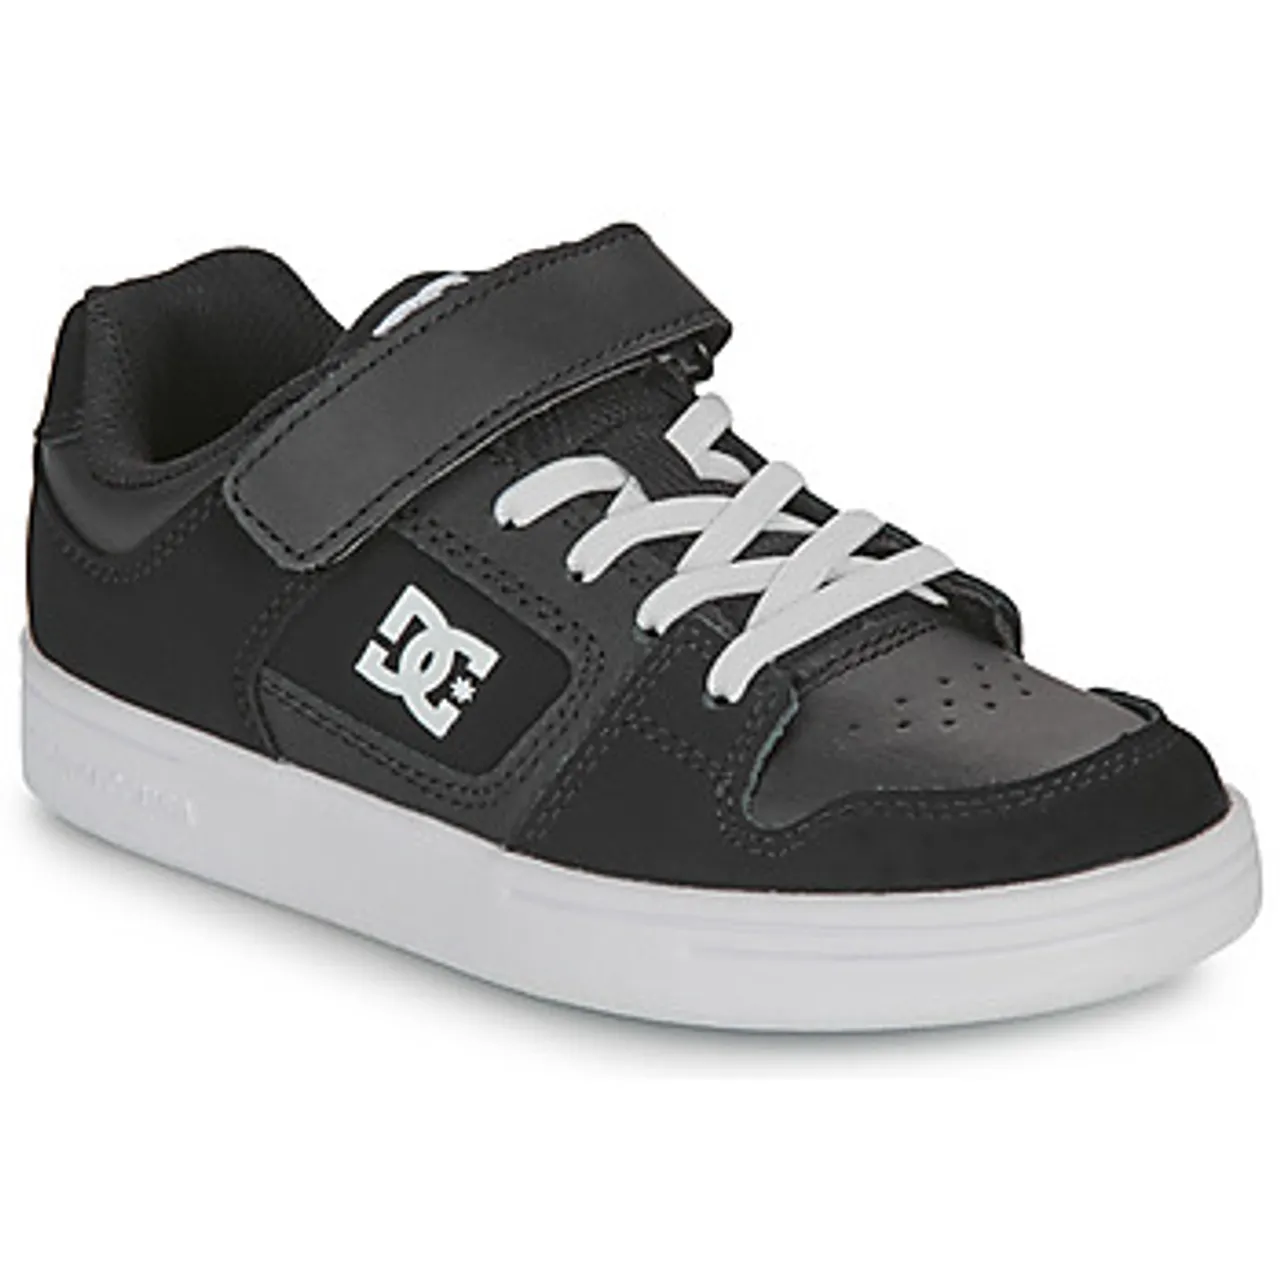 DC Shoes  MANTECA 4 V  boys's Children's Shoes (Trainers) in Black